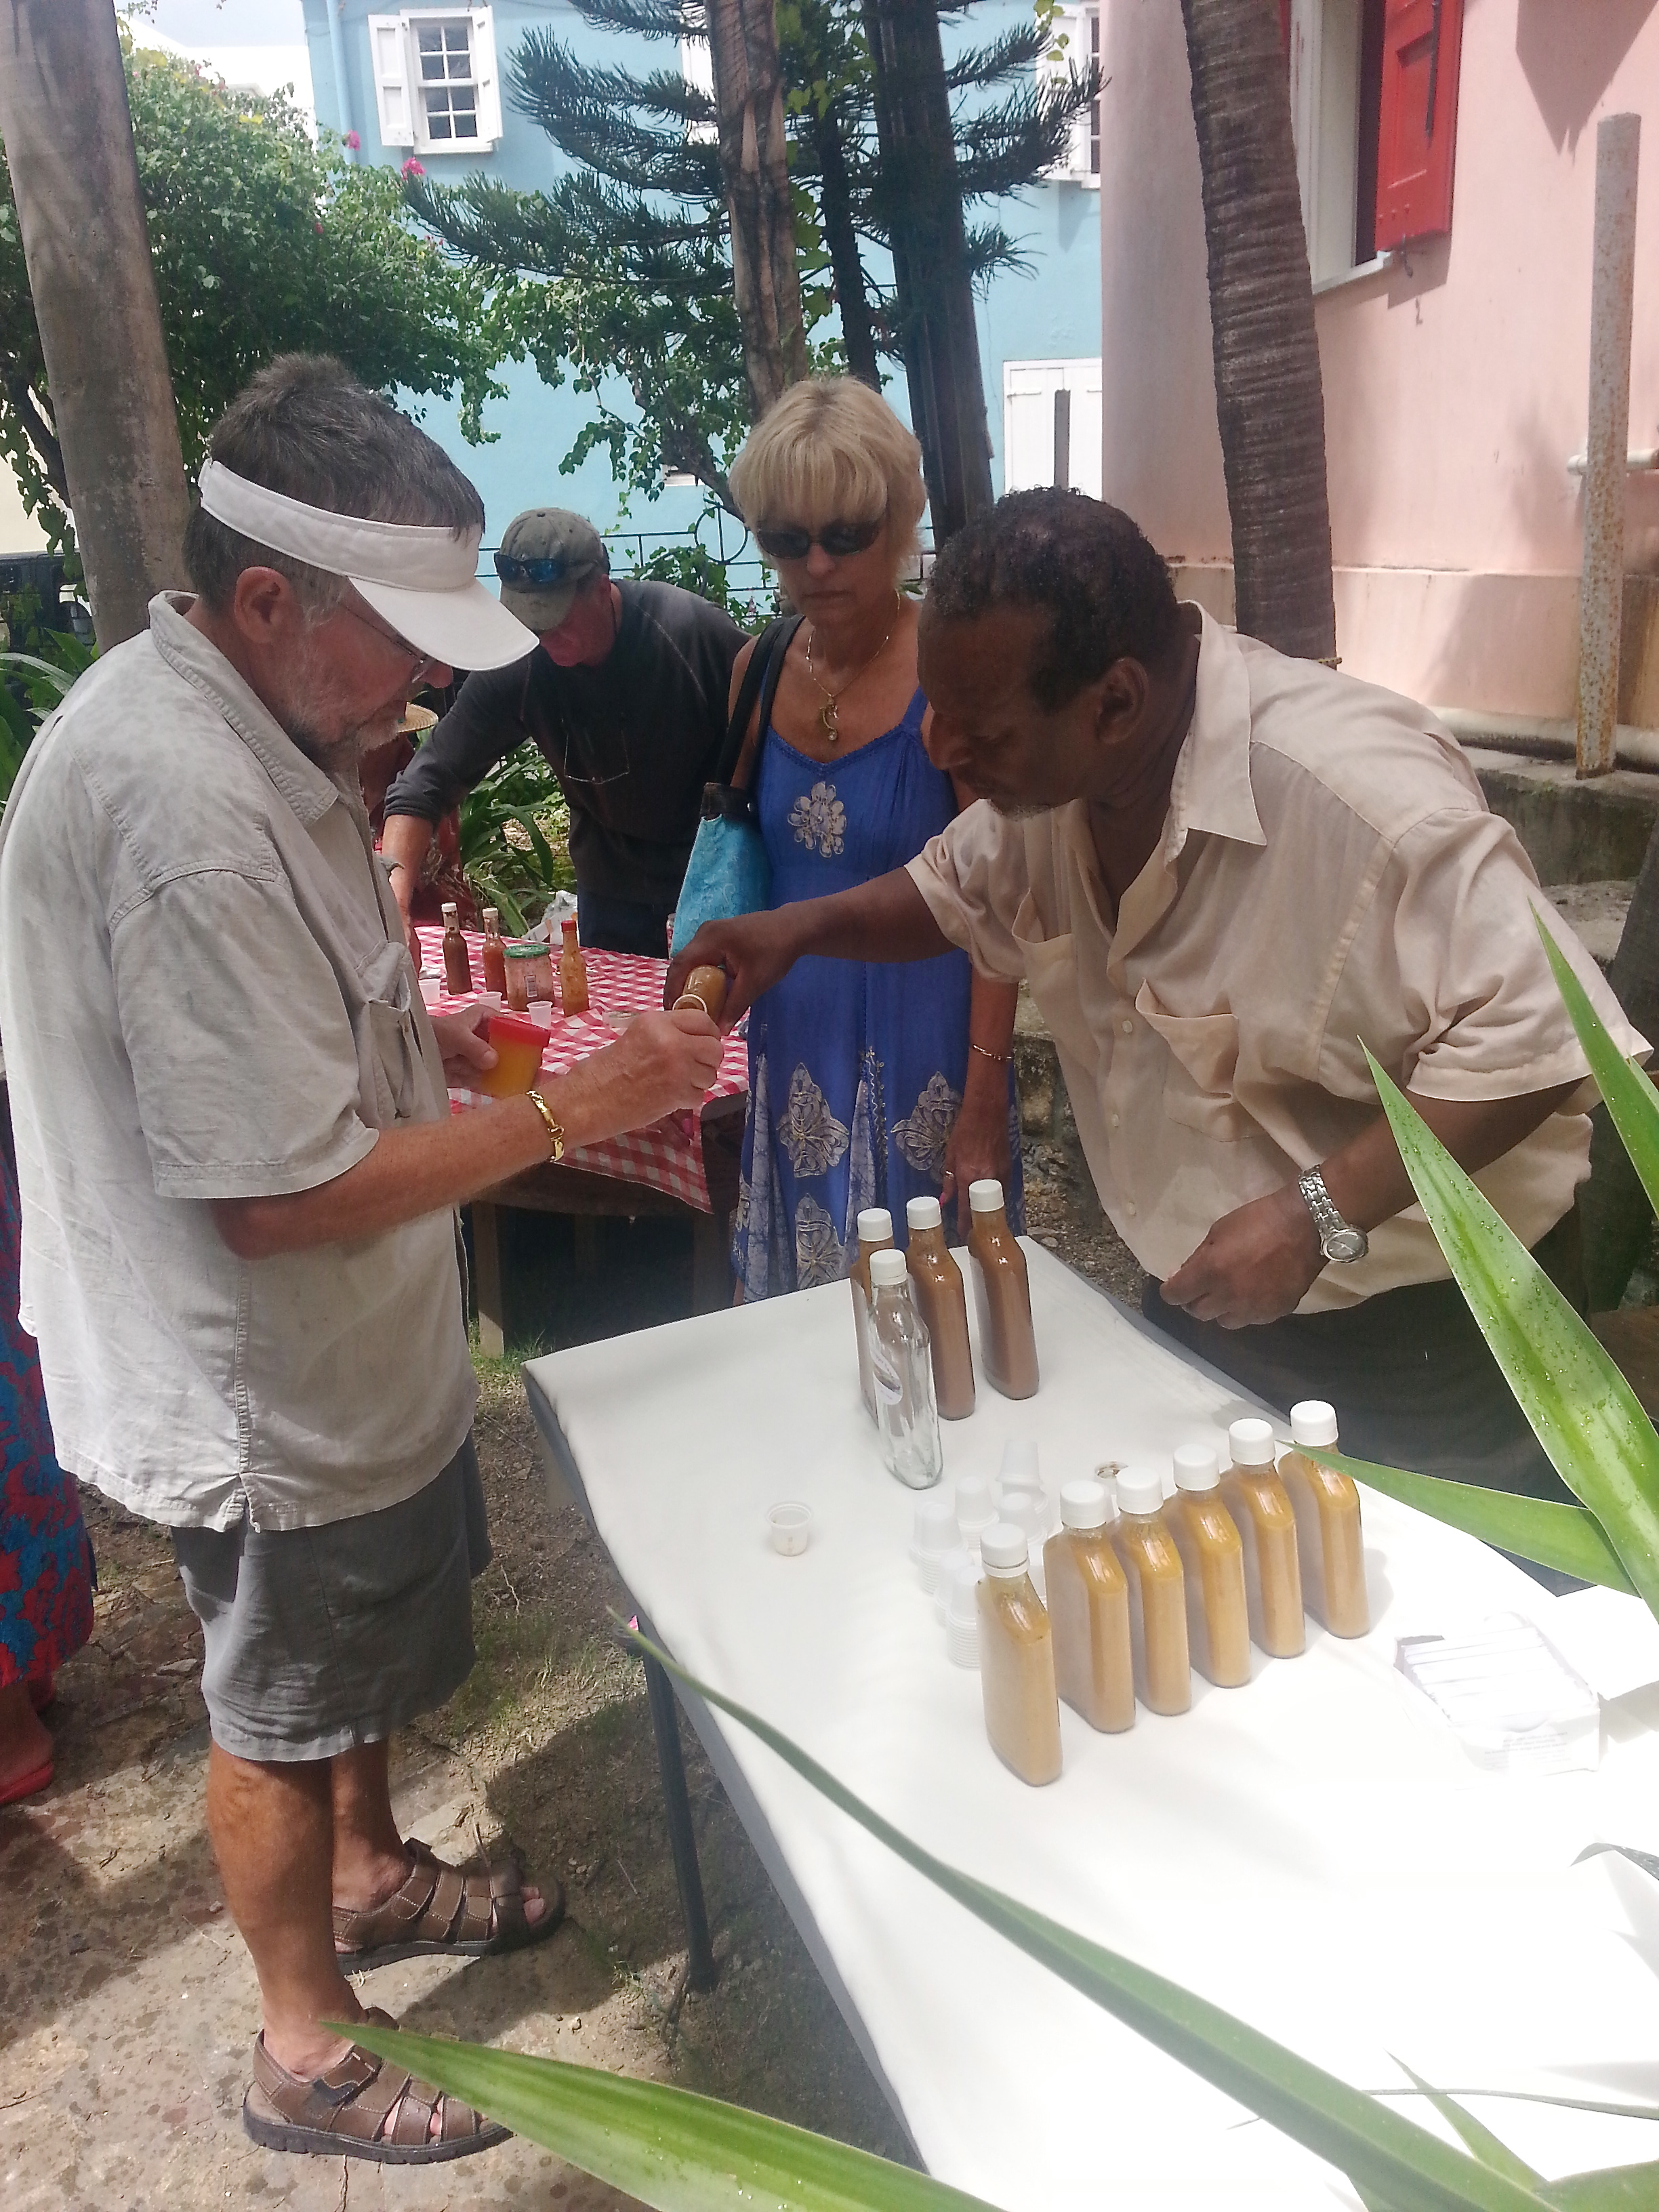 James Gibbs offers a sample Saturday at the Krewe de Croix hot sauce competition.